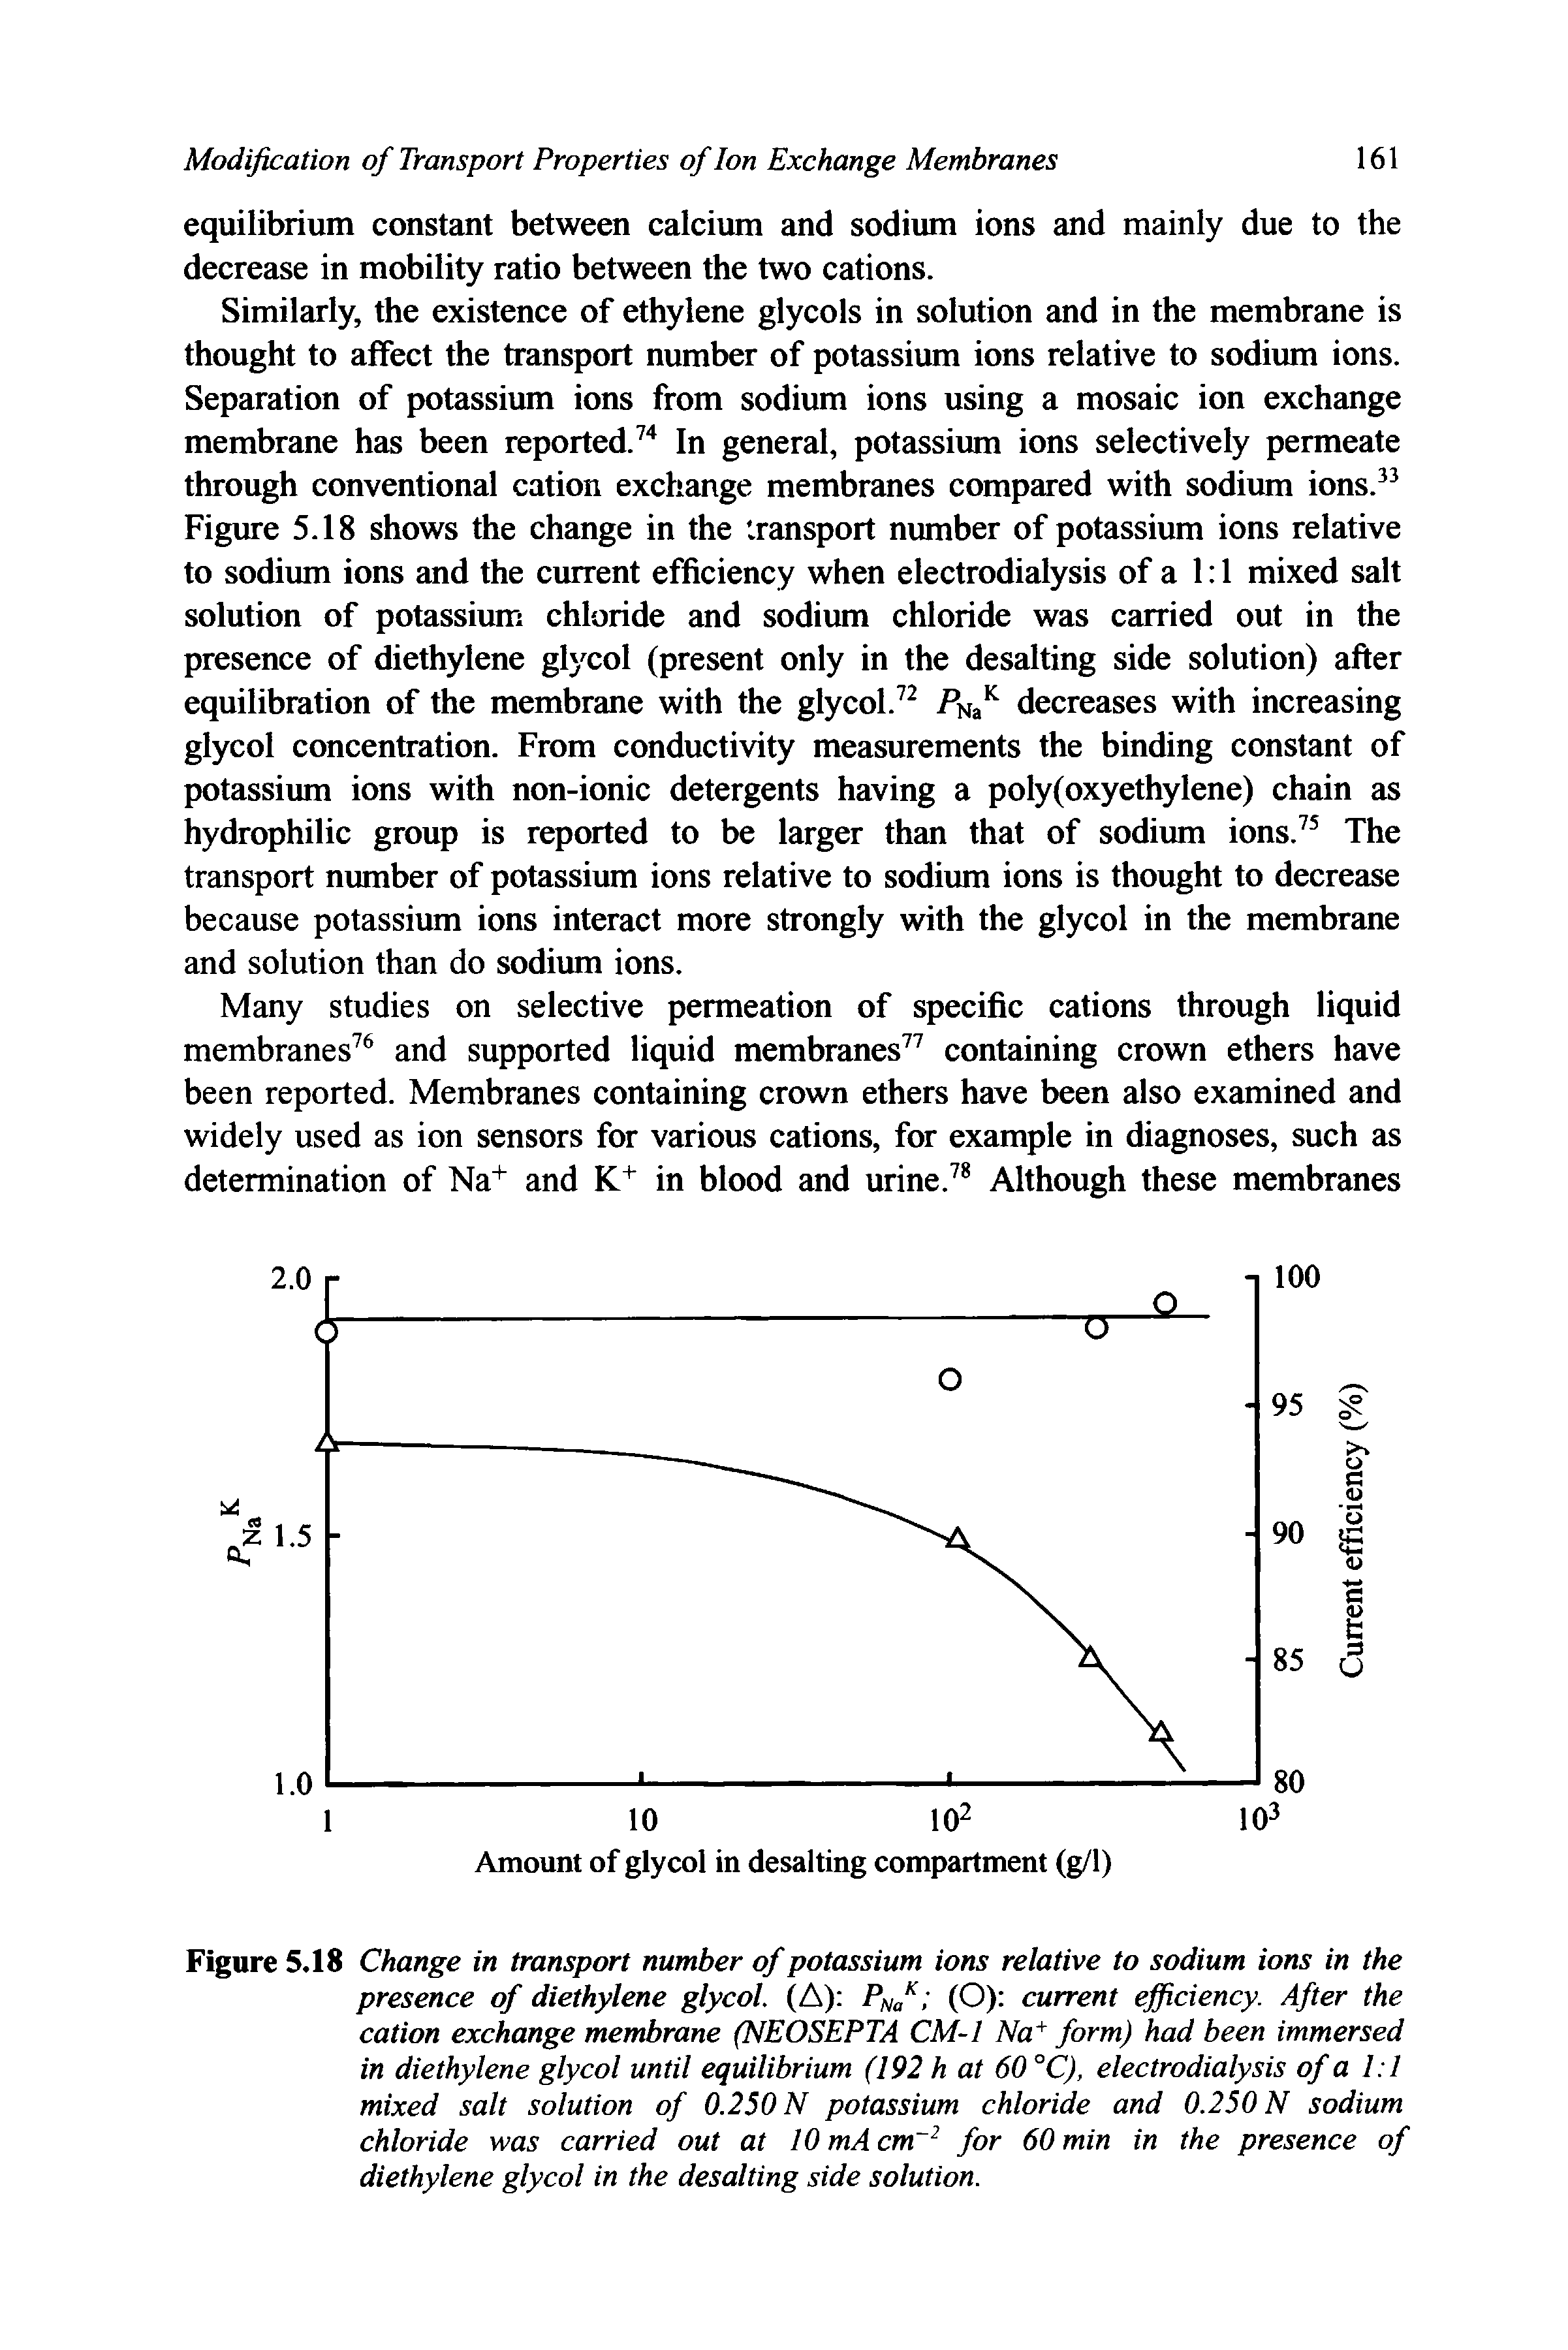 Figure 5.18 Change in transport number of potassium ions relative to sodium ions in the presence of diethylene glycol. (A) PNaK (O) current efficiency. After the cation exchange membrane (NEOSEPTA CM-1 Na+ form) had been immersed in diethylene glycol until equilibrium (192 h at 60 °C), electrodialysis of a 1 1 mixed salt solution of 0.250 N potassium chloride and 0.250 N sodium chloride was carried out at 10 mA cm 2 for 60 min in the presence of diethylene glycol in the desalting side solution.